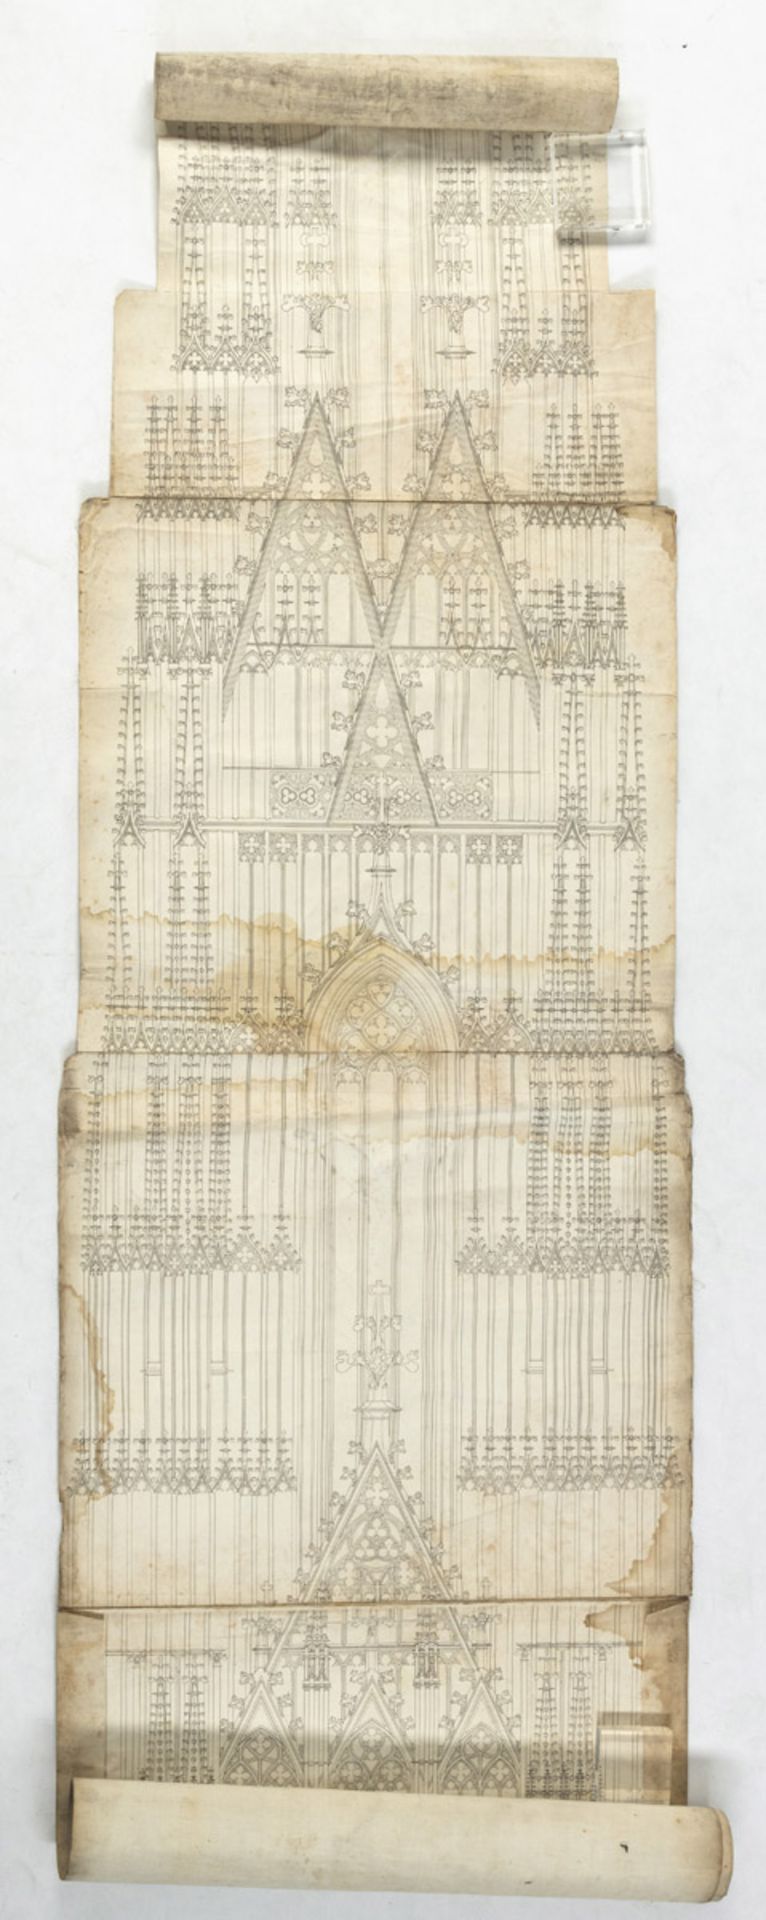 Facsimile of a cutaway drawing of the tower of St. Stephen's Cathedral, Vienna - Image 3 of 4